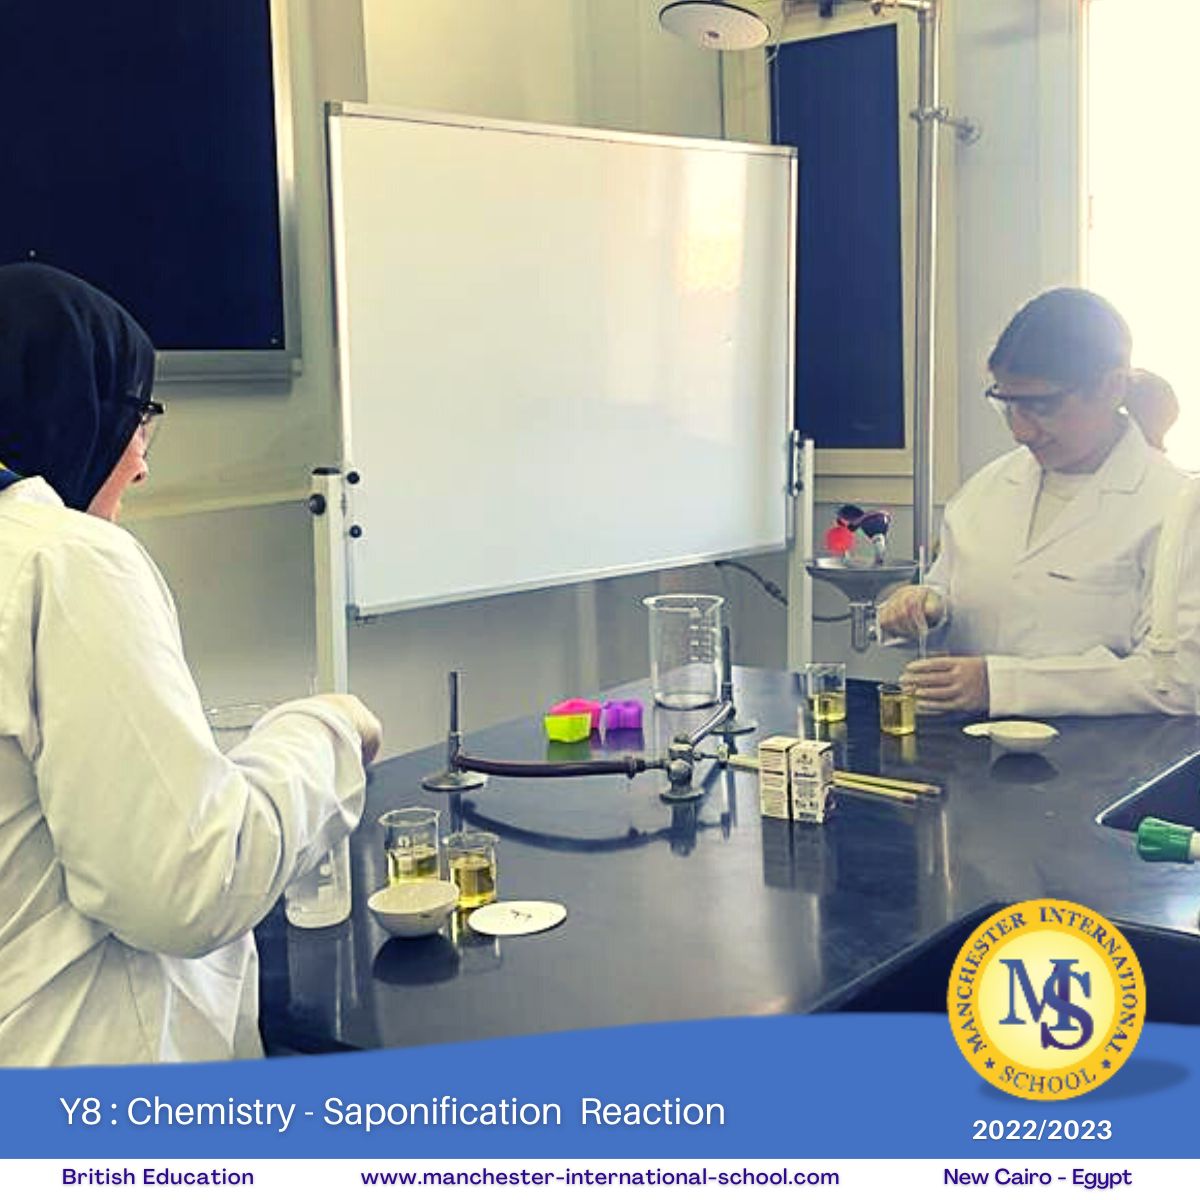 Y8 : Chemistry – Saponification eaction